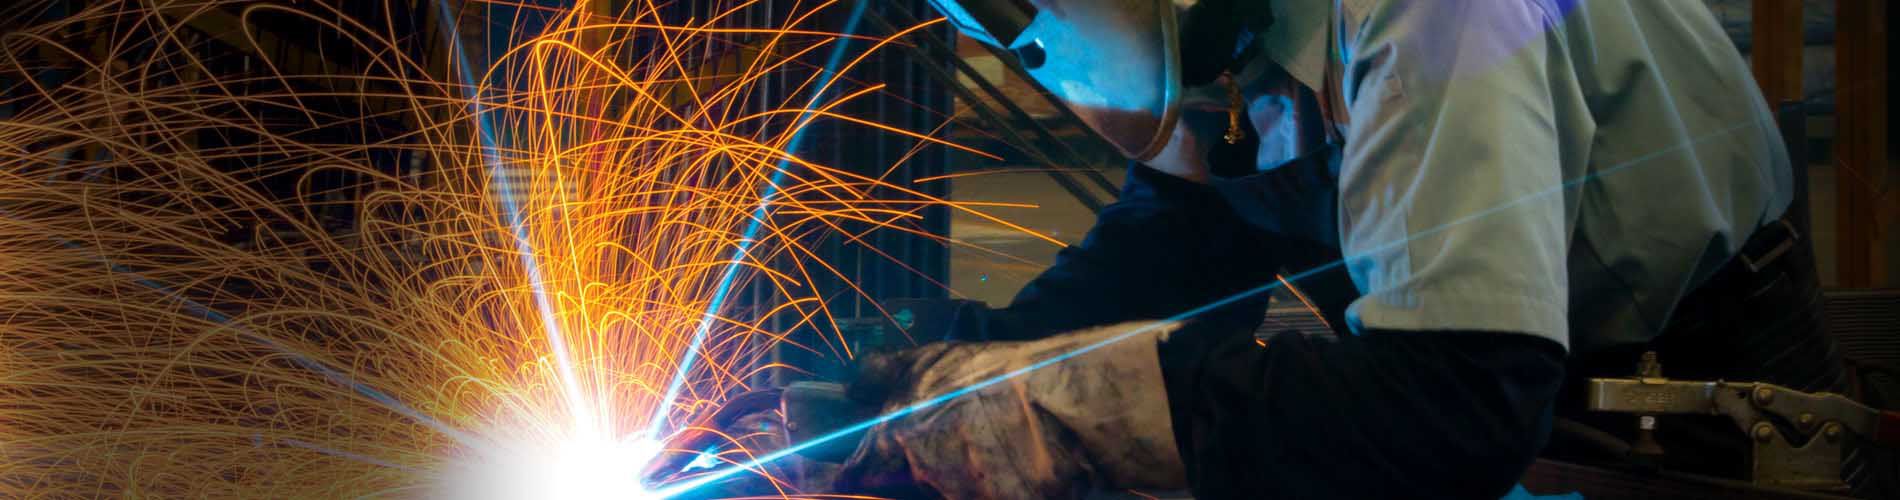 Image of a welder performing welding services, while the welding tool produces orange and blue light and sparks.